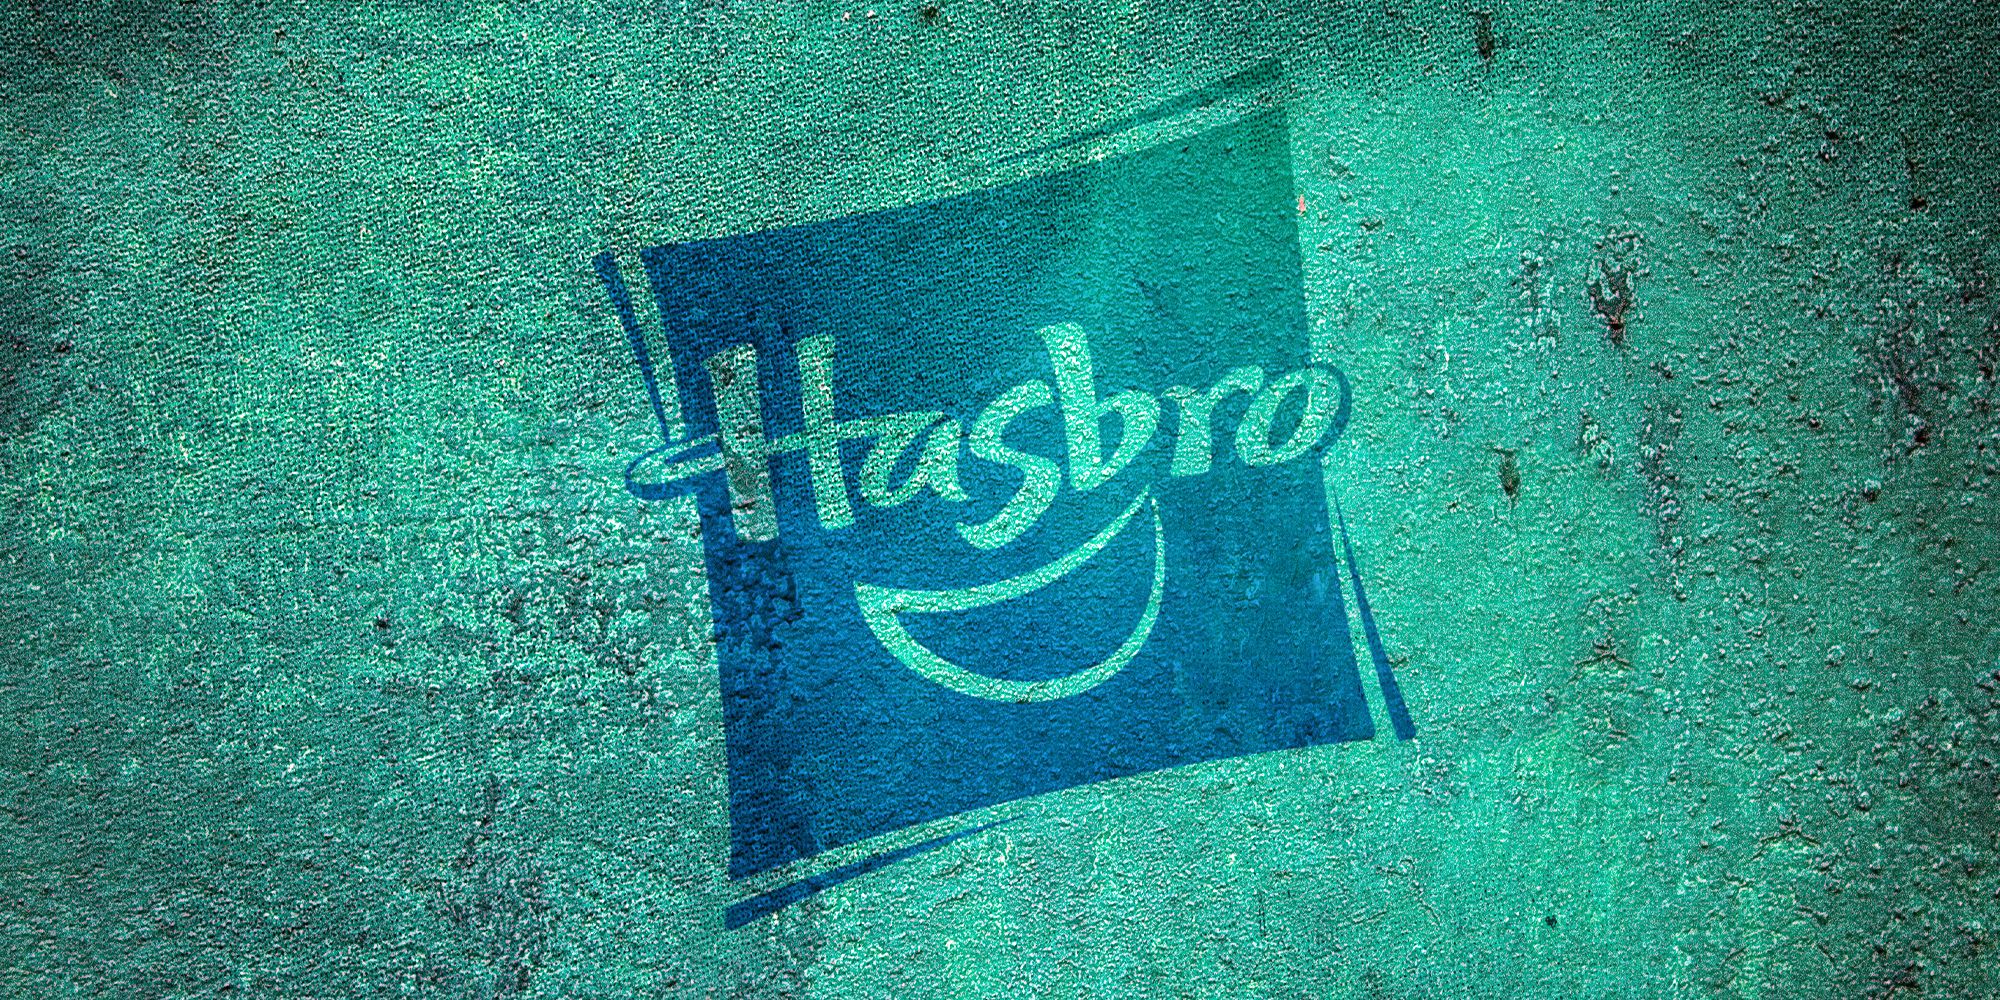 Hasbro logo over a gritty teal background